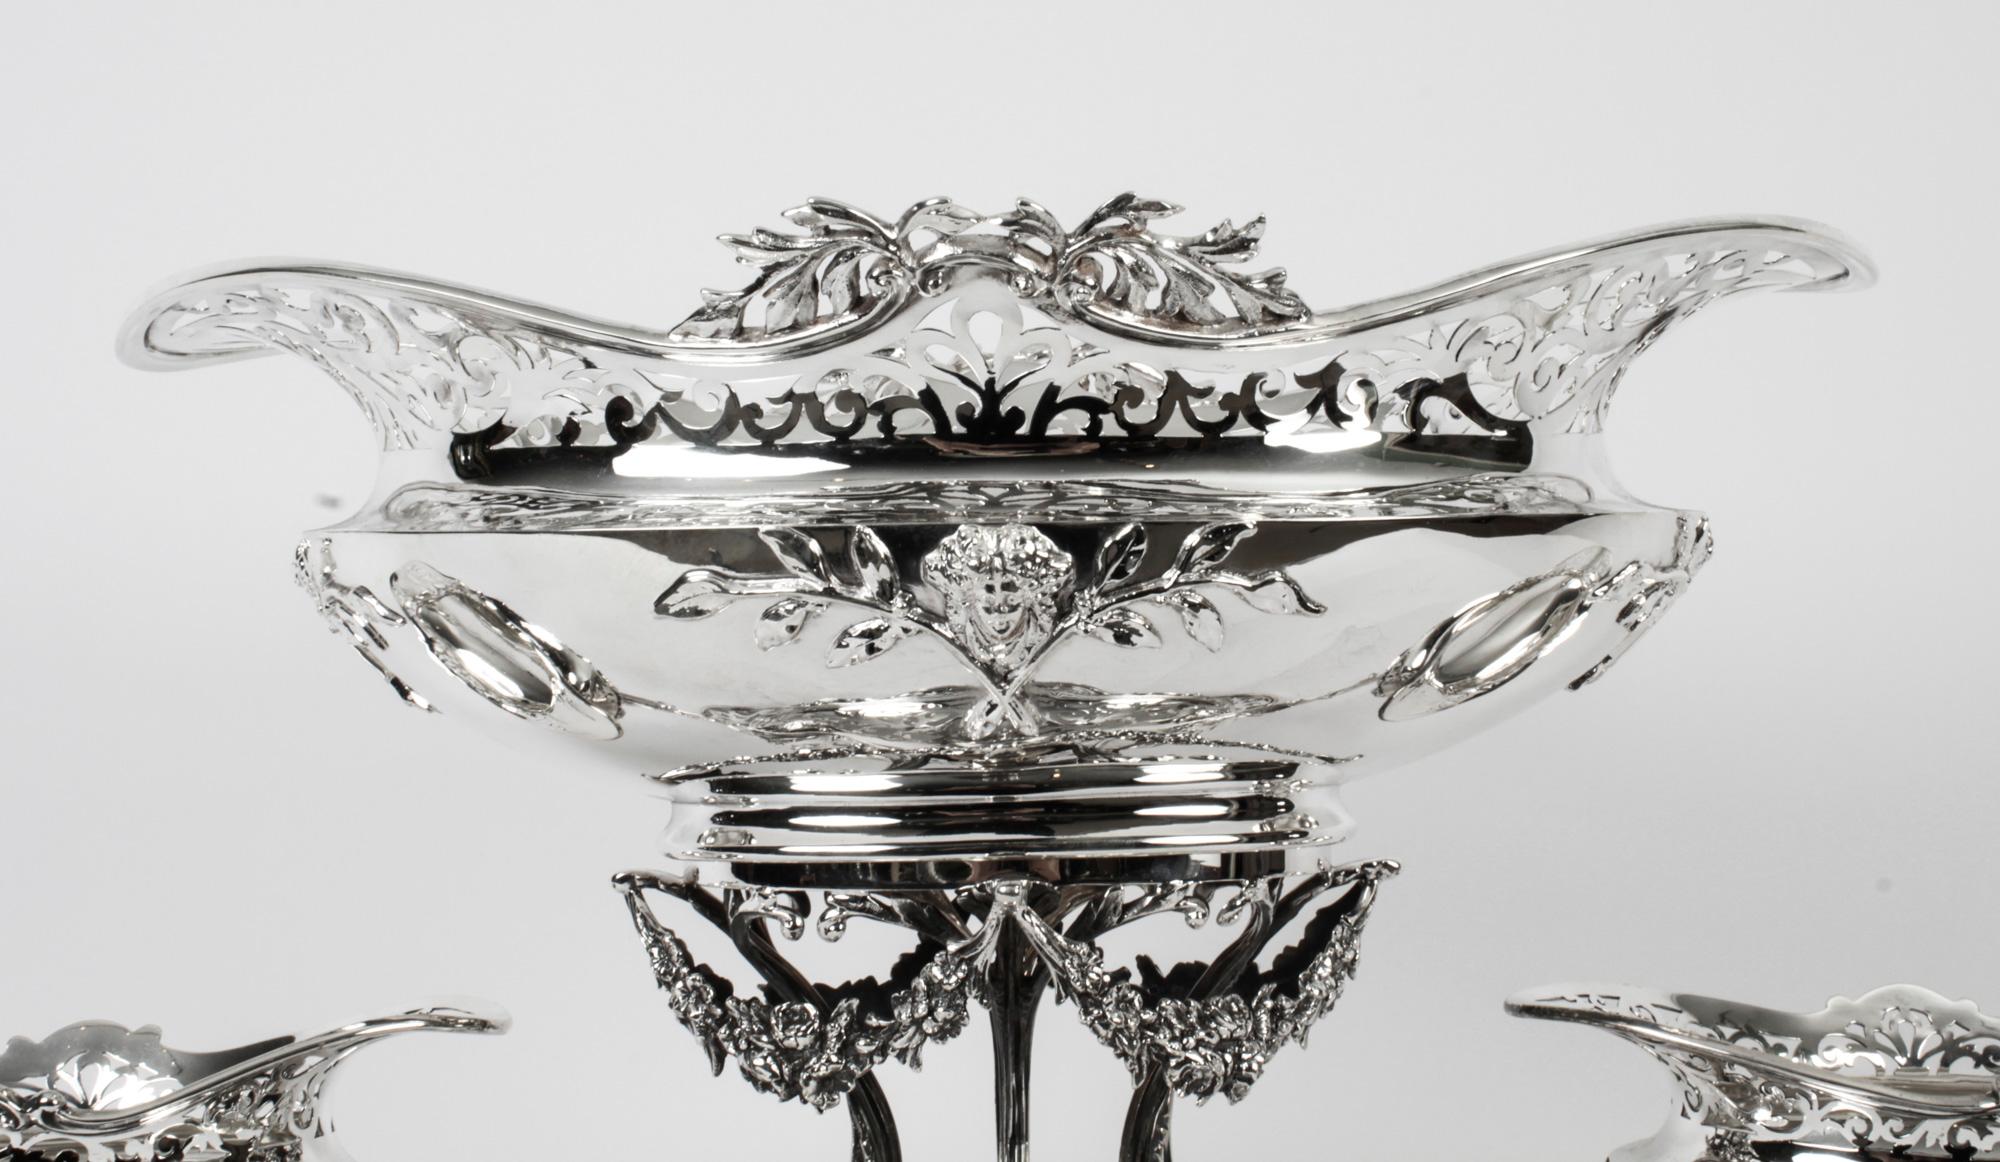 This is a large and impressive antique silver-plated Victorian centrepiece bearing the makers mark of the renowned silversmiths to the Queen, Mappin & Webb of London, dated 1880.
 
This wonderful centerpiece was made with a large central basket